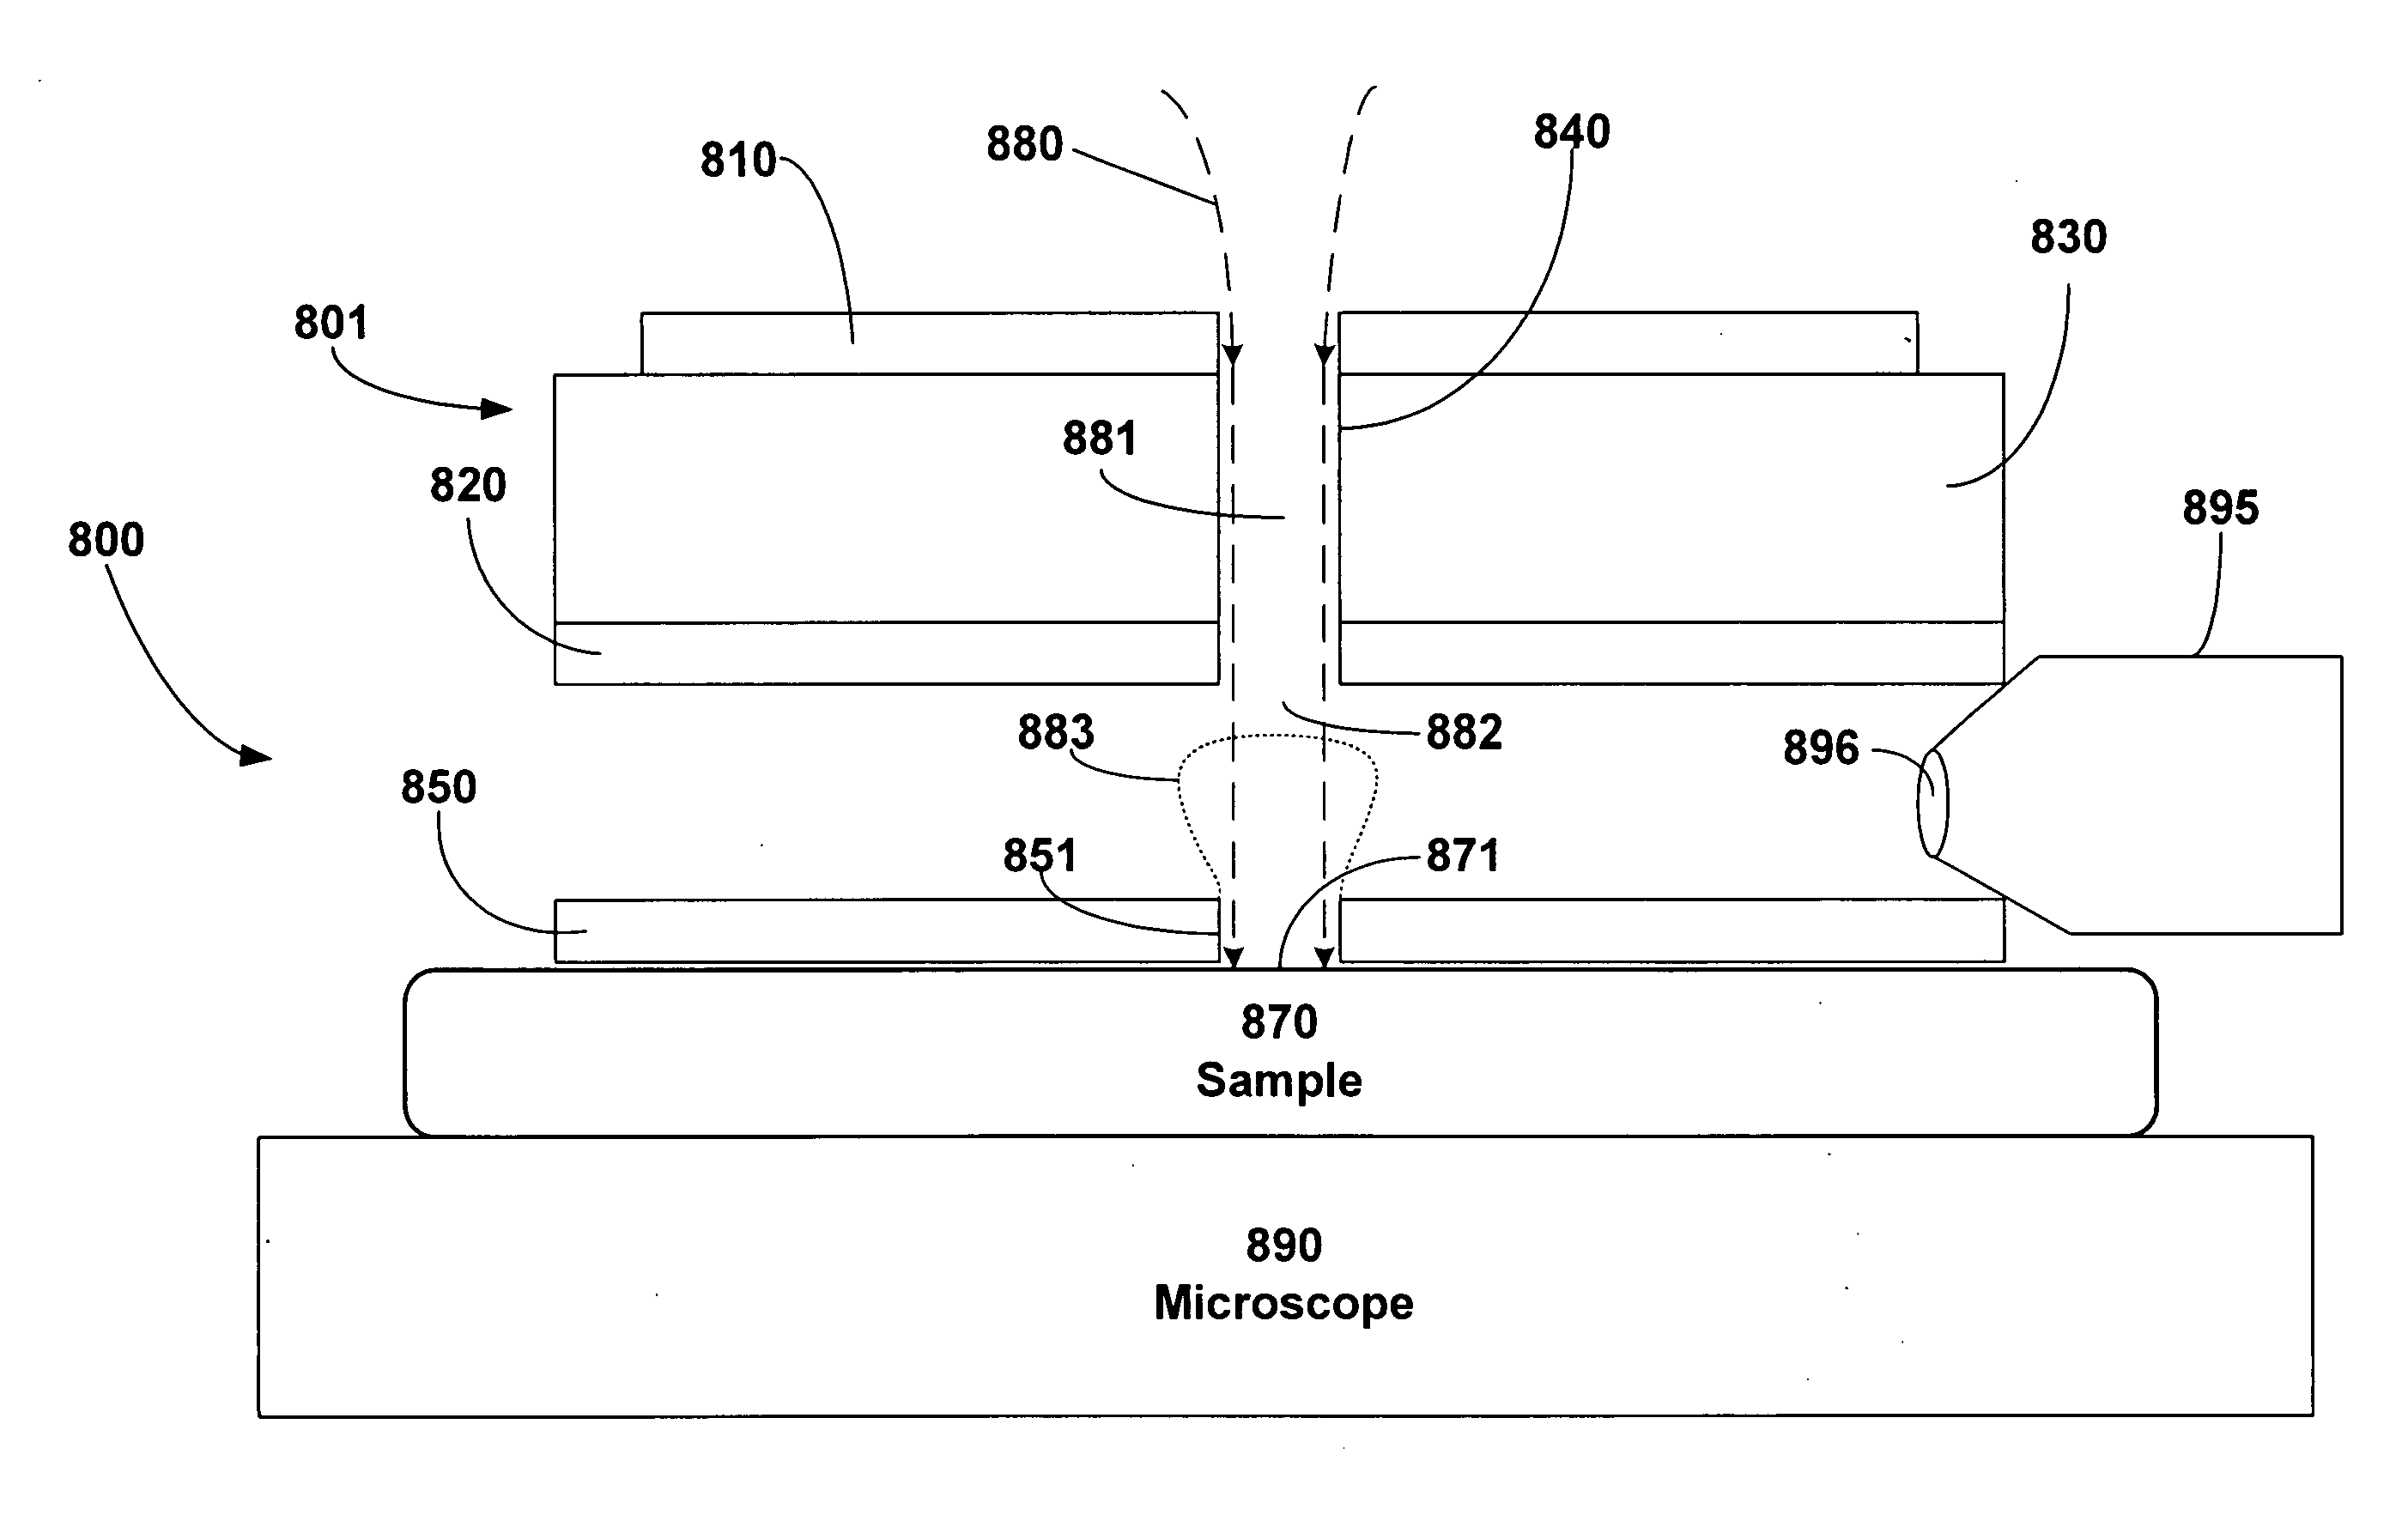 System and method for spatially-resolved chemical analysis using microplasma desorption and ionization of a sample